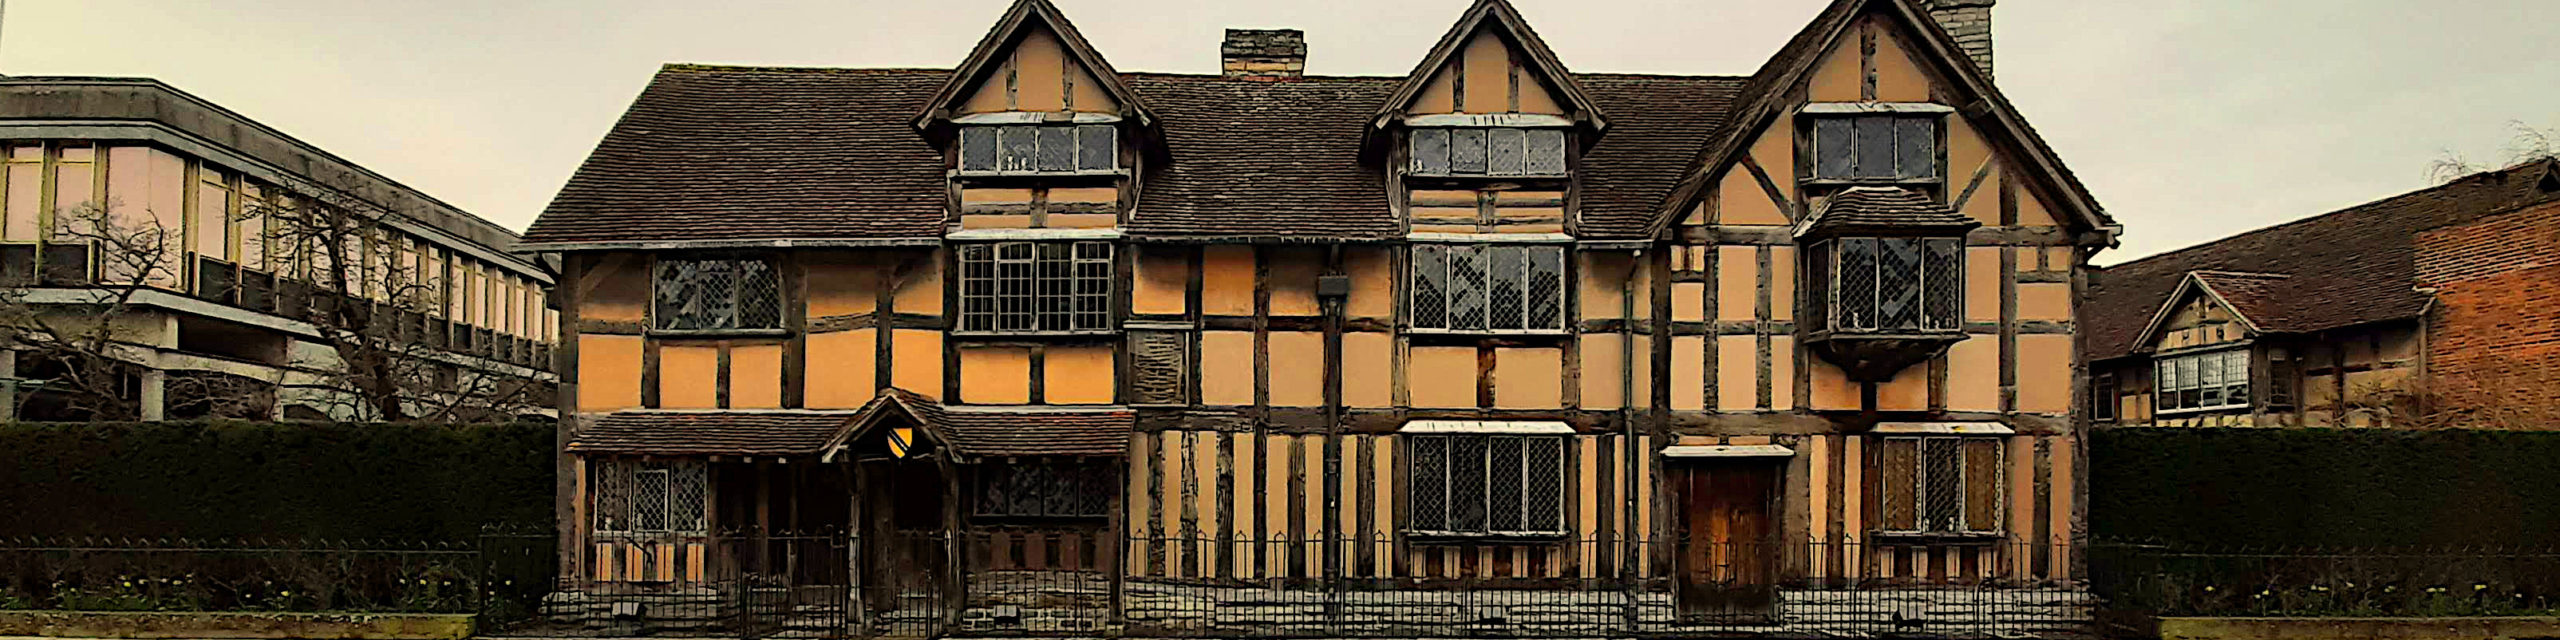 Combine your trip from Reading with a short break in Stratford-upon-Avon